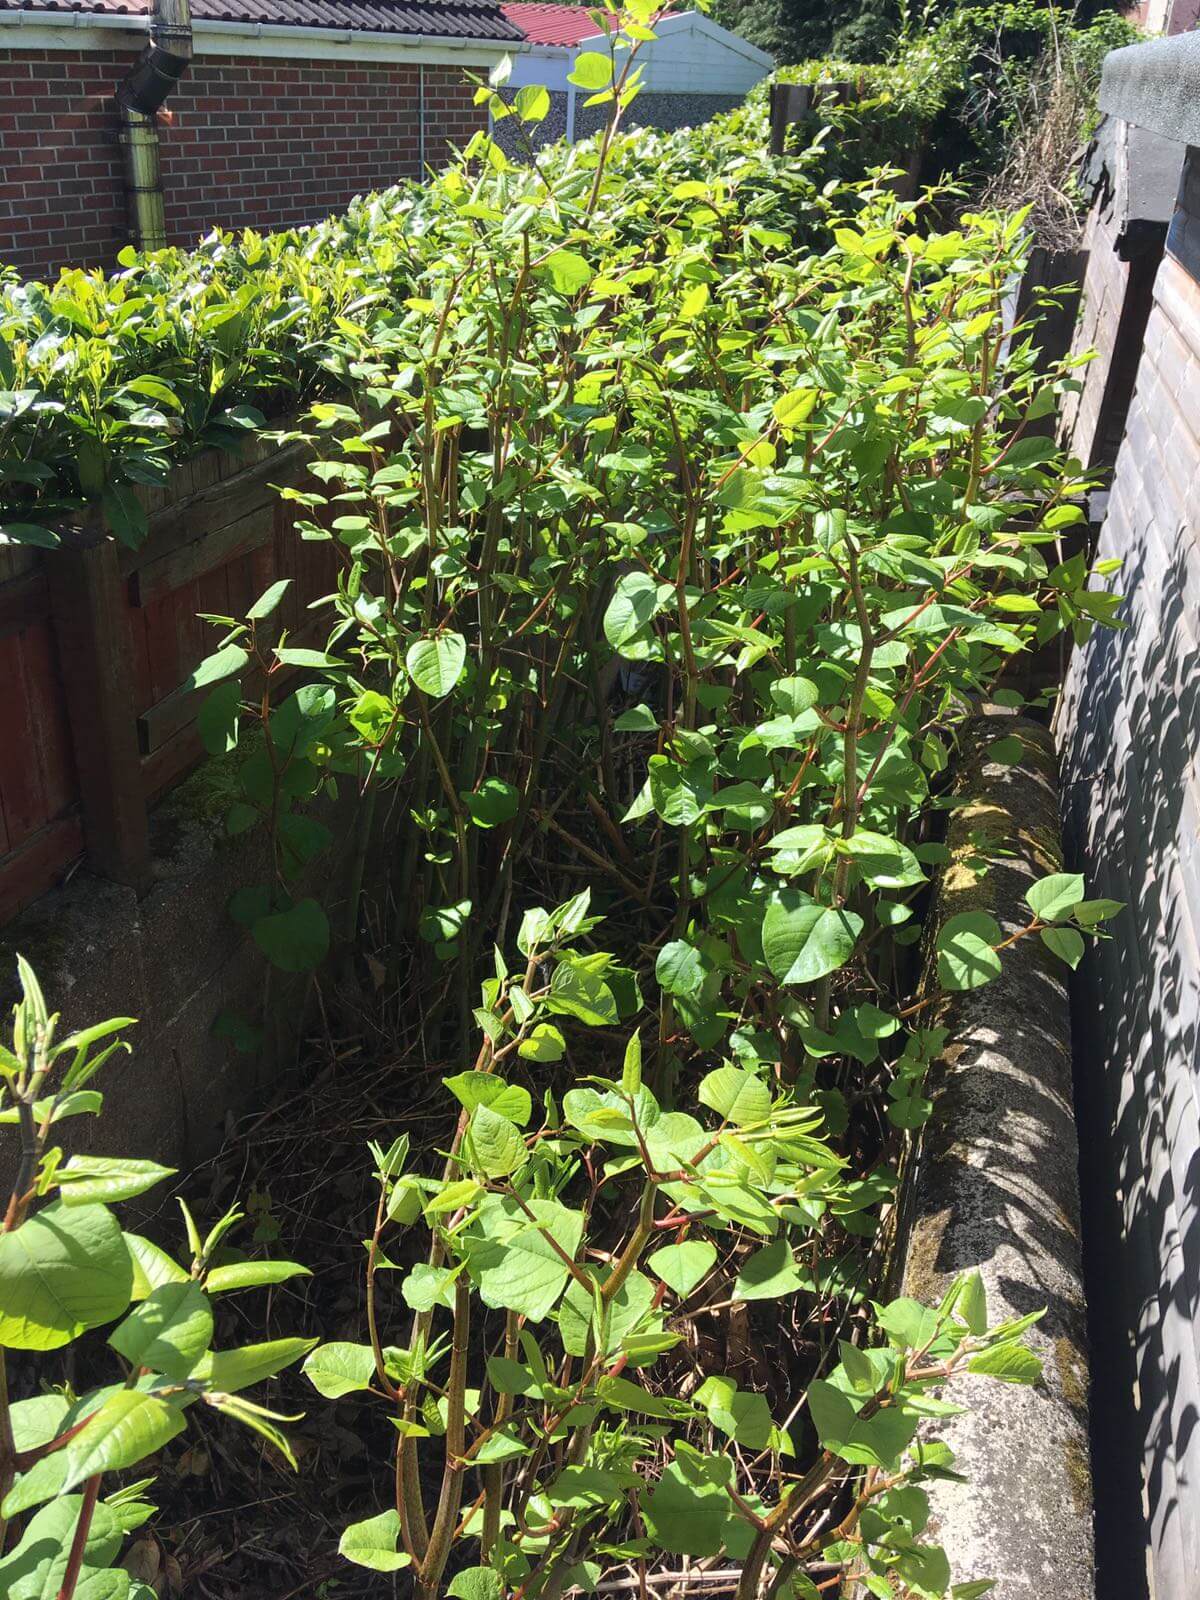 Removal of Japanese Knotweed in Solihull